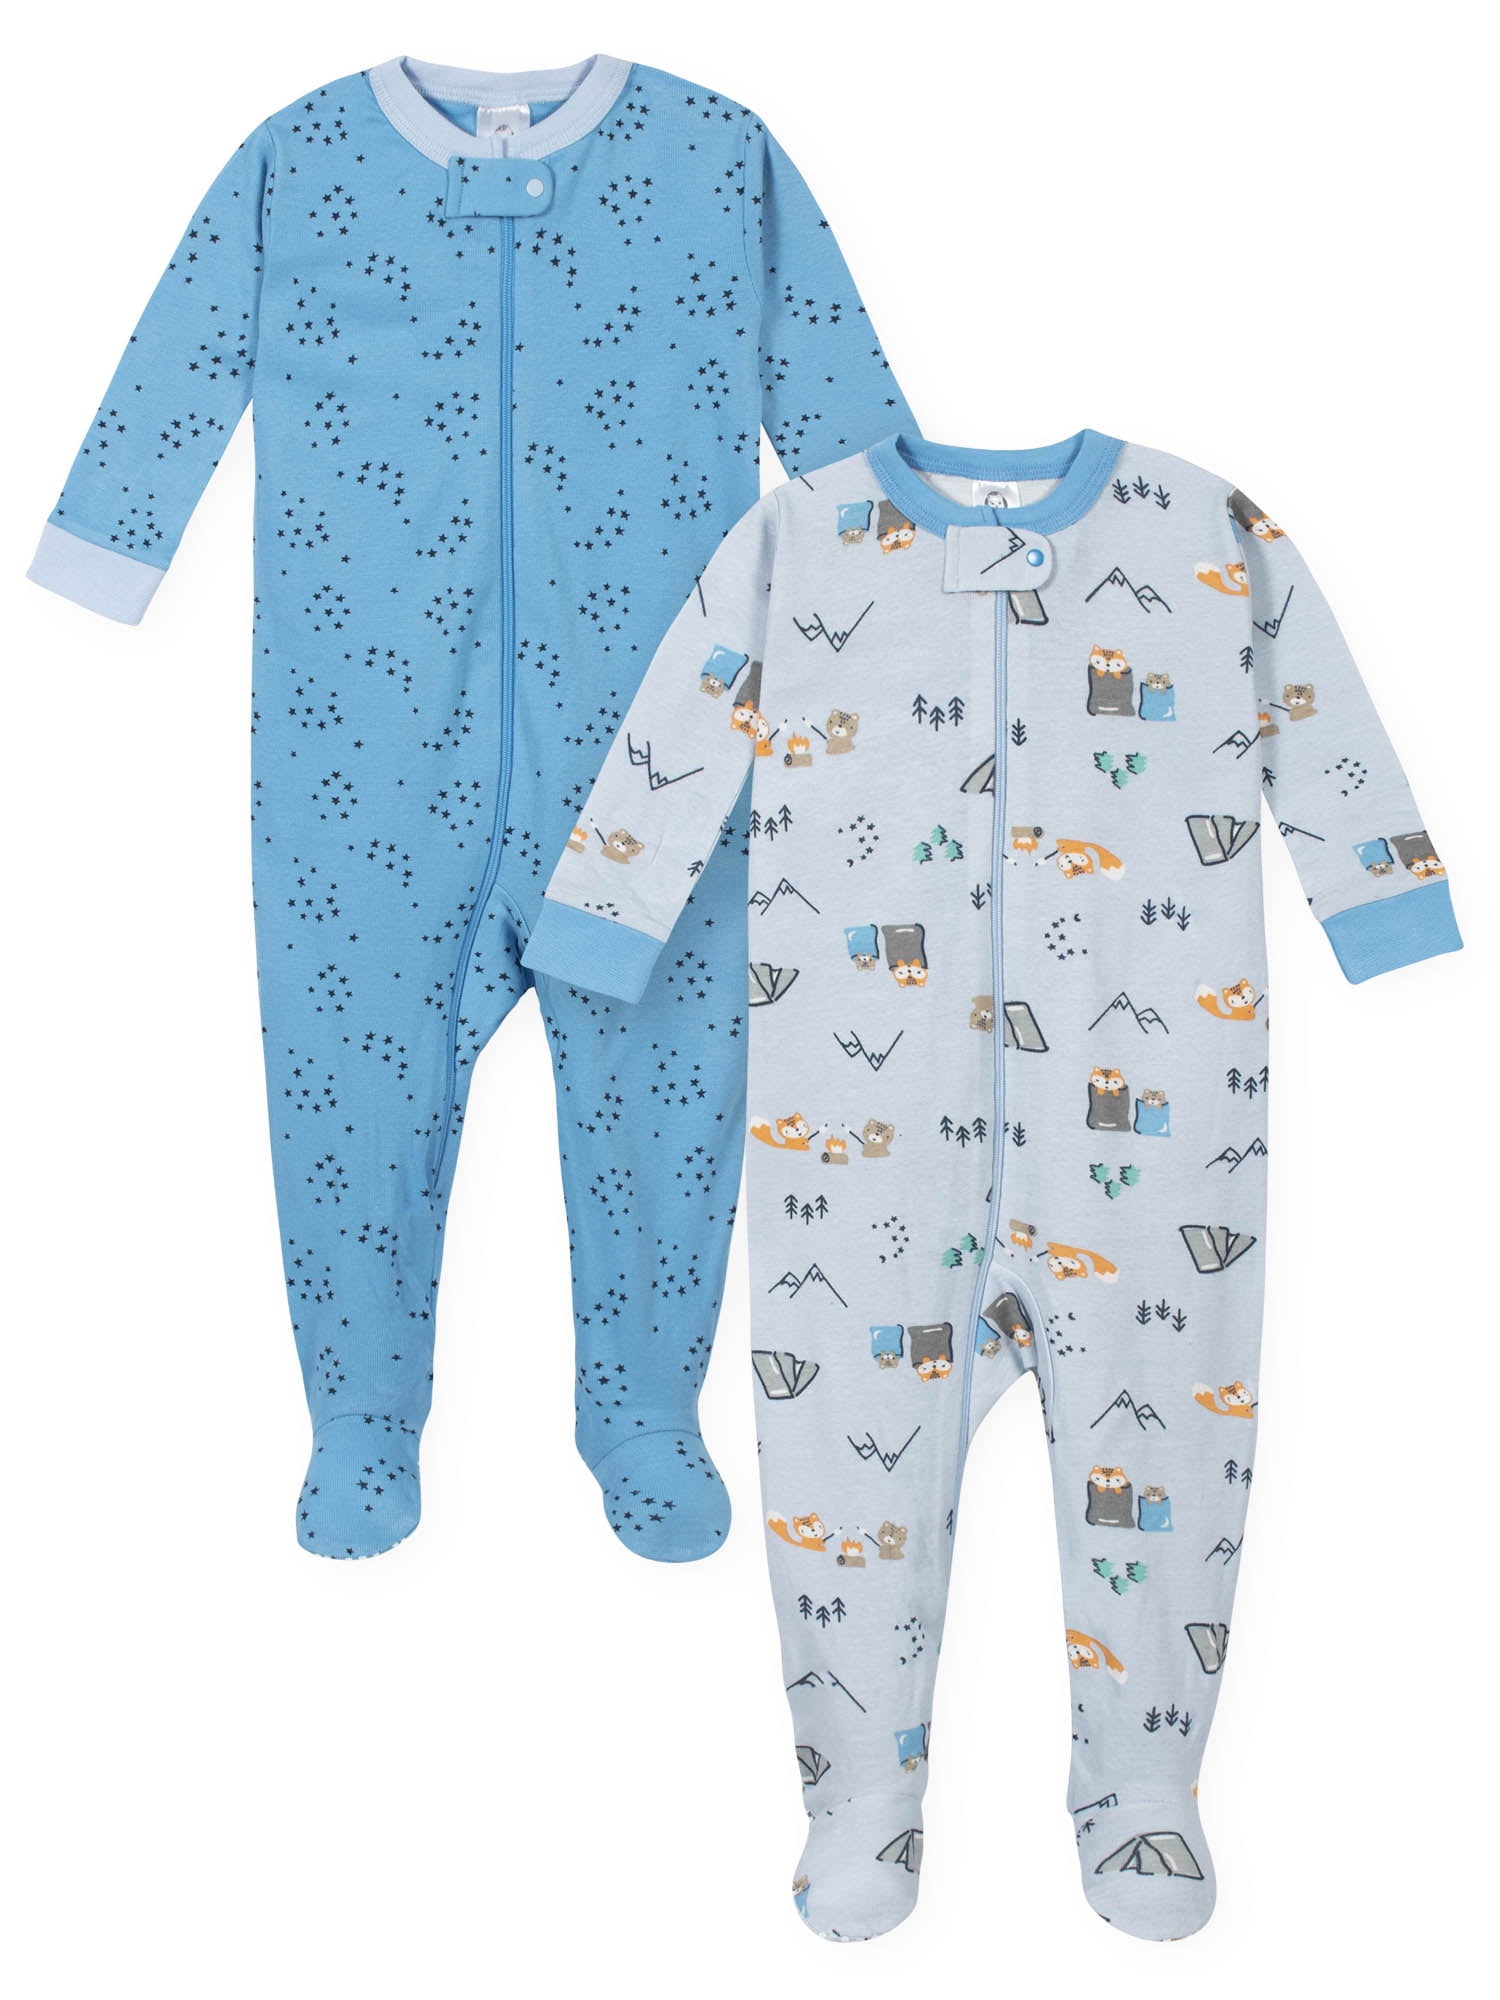 Asher and Olivia Boys 2-Pack Pajama Set Baby Clothes Pjs Sleepers Footless Sleepwear